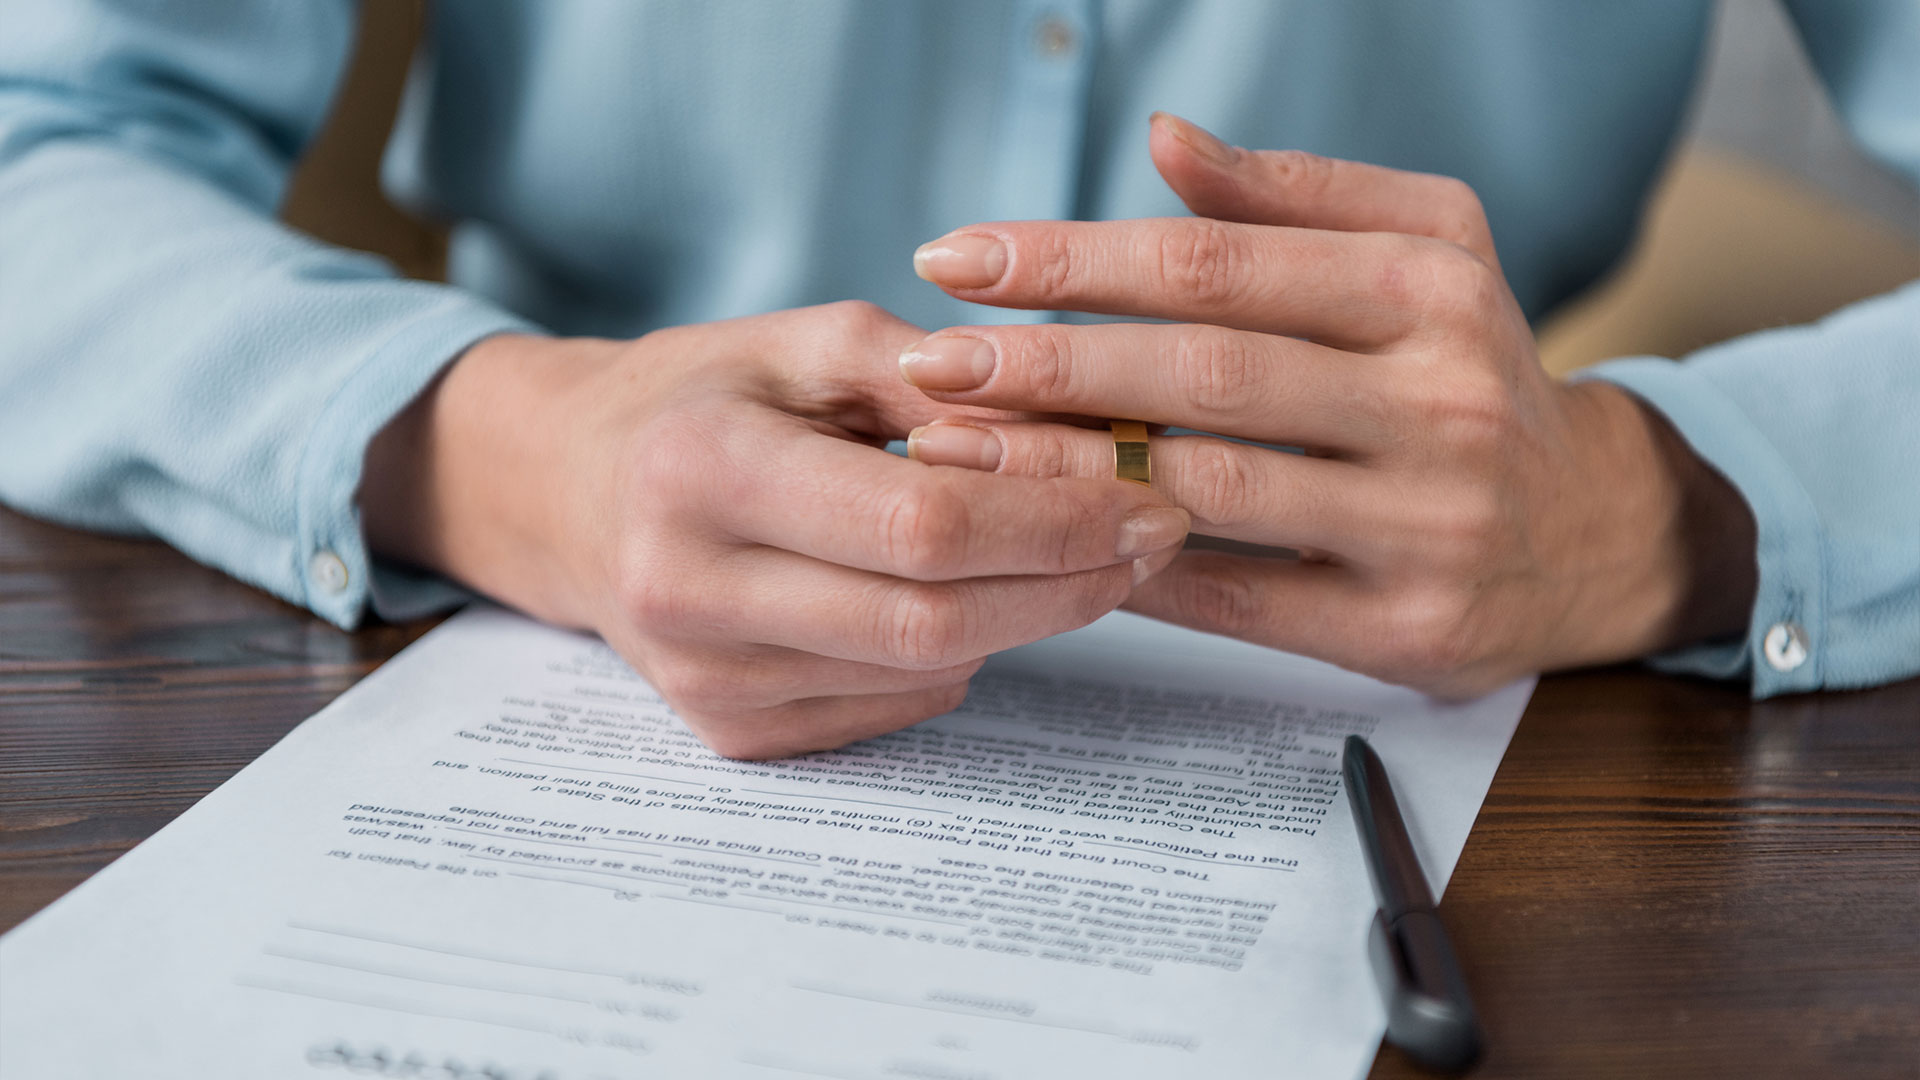 common misconceptions about money common law divorces and marriage in mississauga